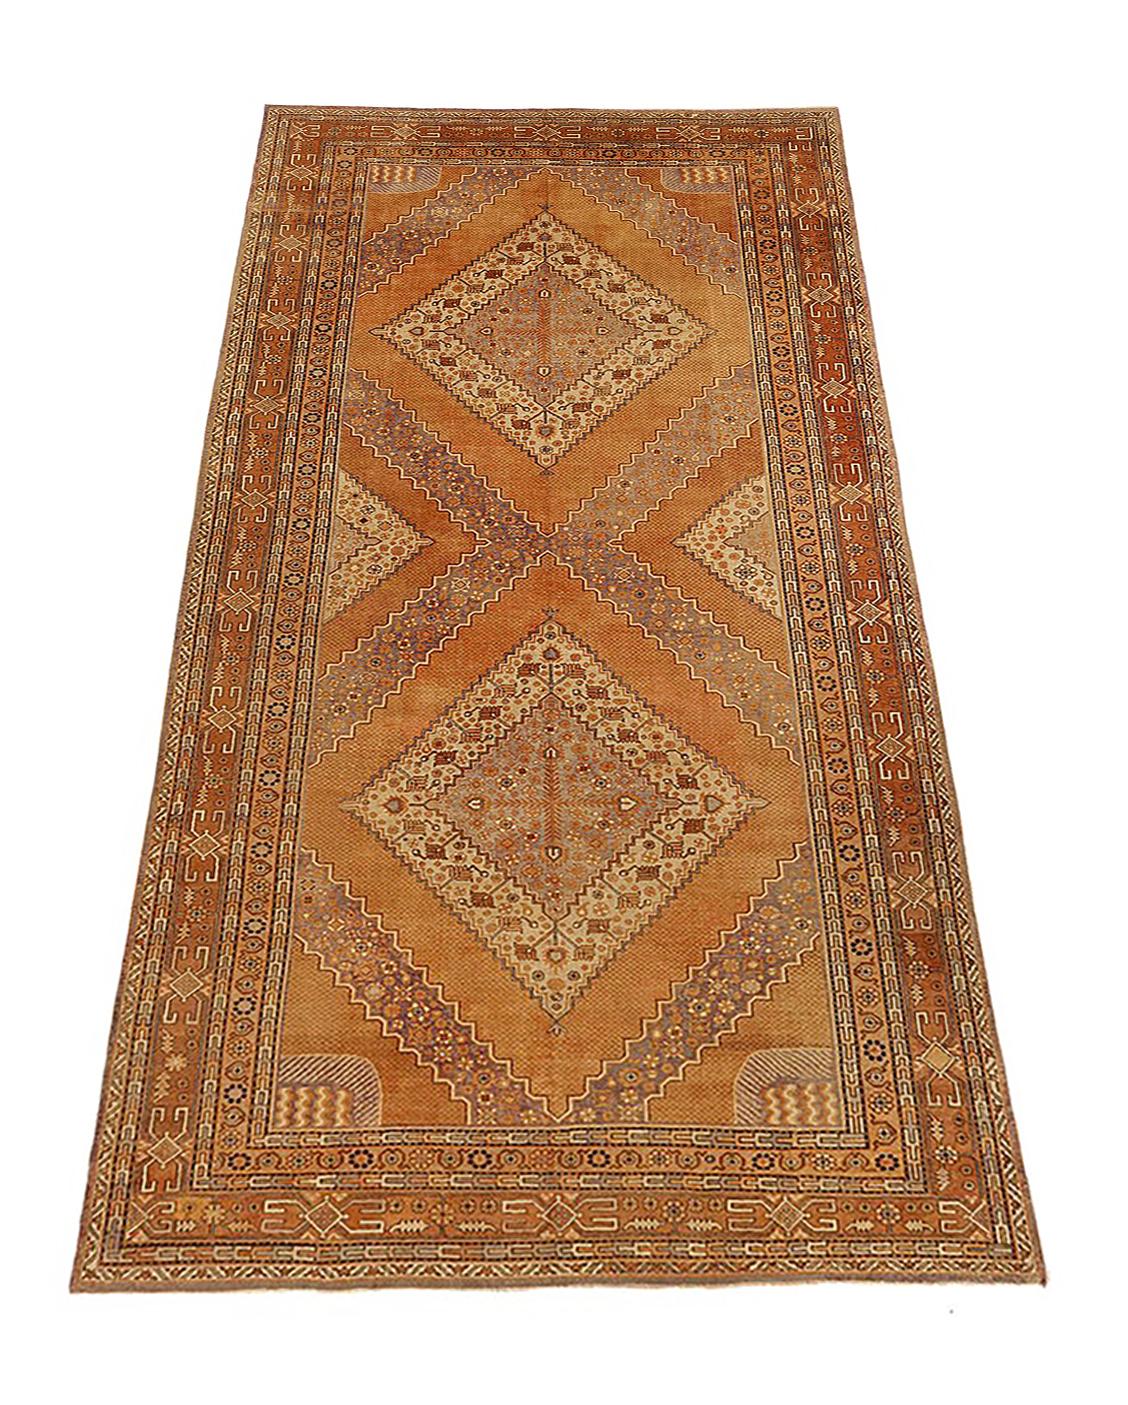 Antique Russian rug handwoven from the finest sheep’s wool and colored with all-natural vegetable dyes that are safe for humans and pets. It’s woven using Khotan design featuring a mix of large diamond medallion patterns in beige and brown. It’s a